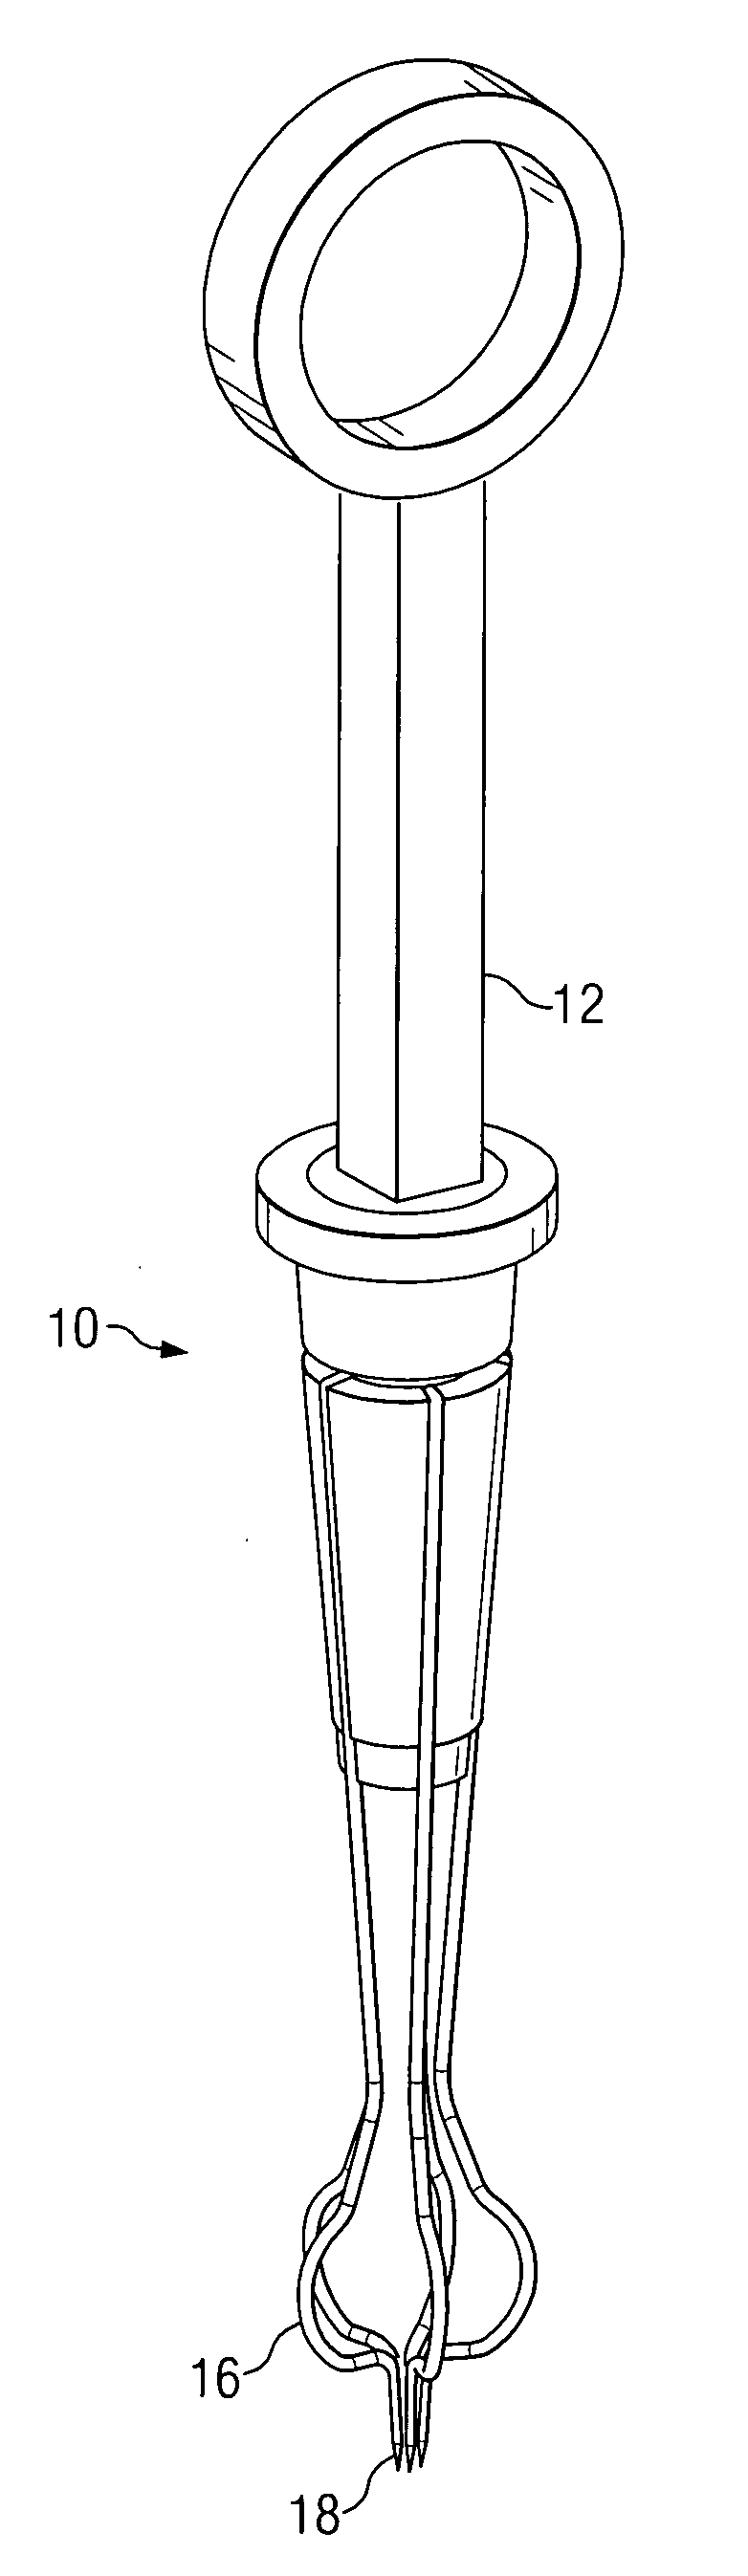 System and method for attaching a vein, an artery, or a tube in a vascular environment